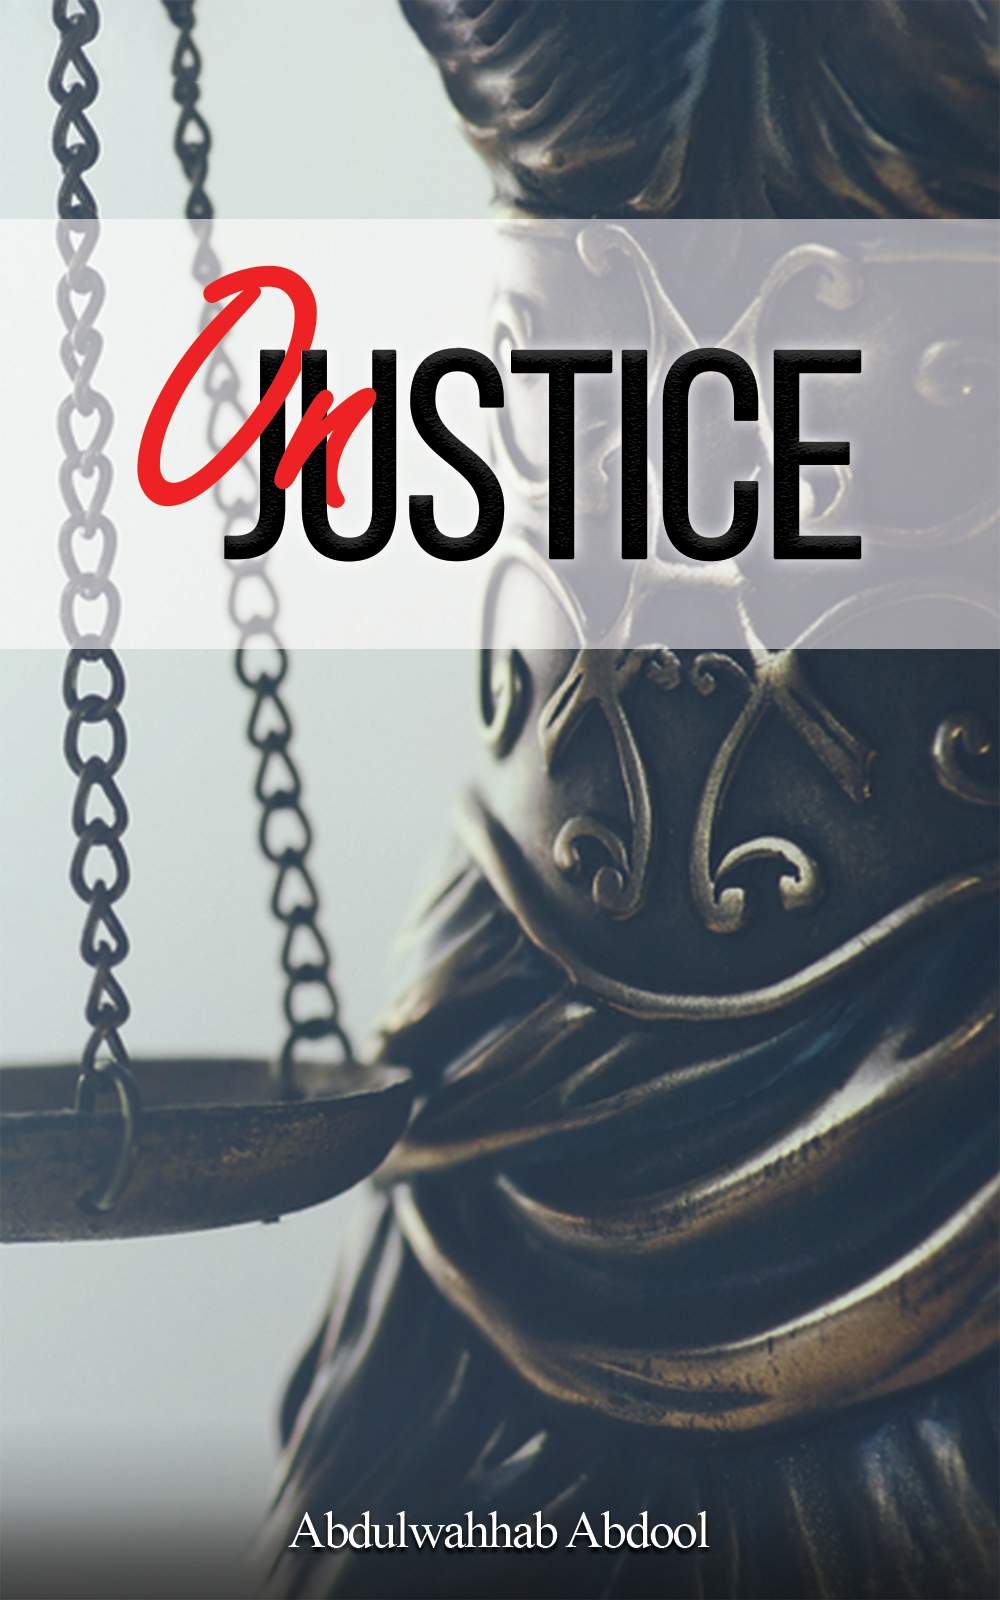 On Justice